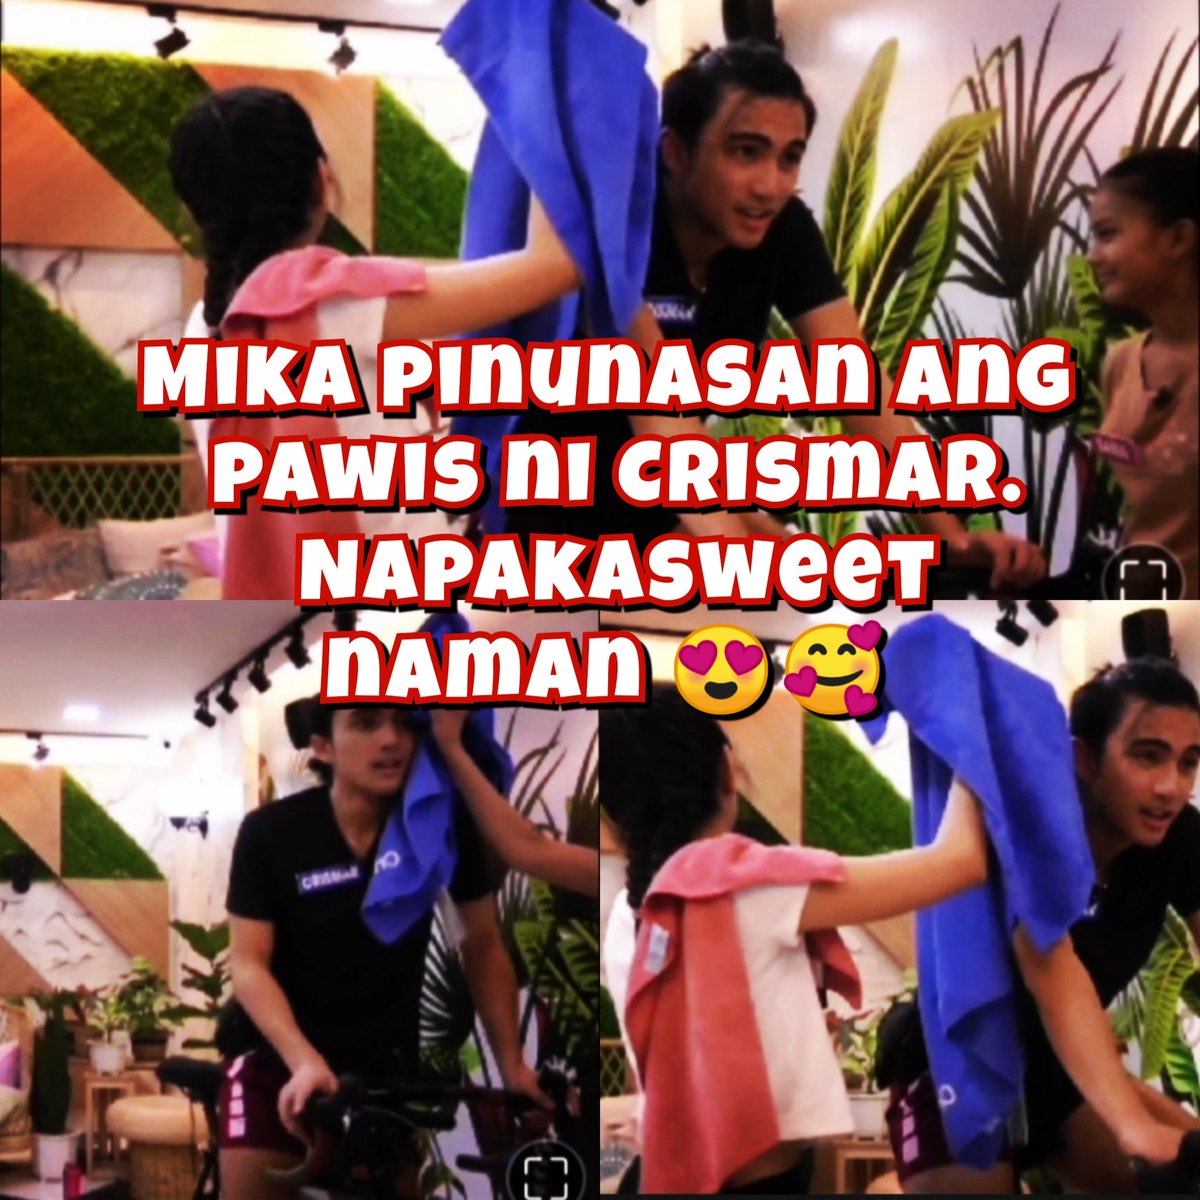 Ang sweet naman ng magbest-friend na to. ❤️🥰😍

Watch here:
youtu.be/nrloGZw3zN0

#PBBConnect500kms
@pajares_world @MikaPajaresOfc @thecrismarketer @MikaPajaresMNL @ra_rubiano @pbbmika